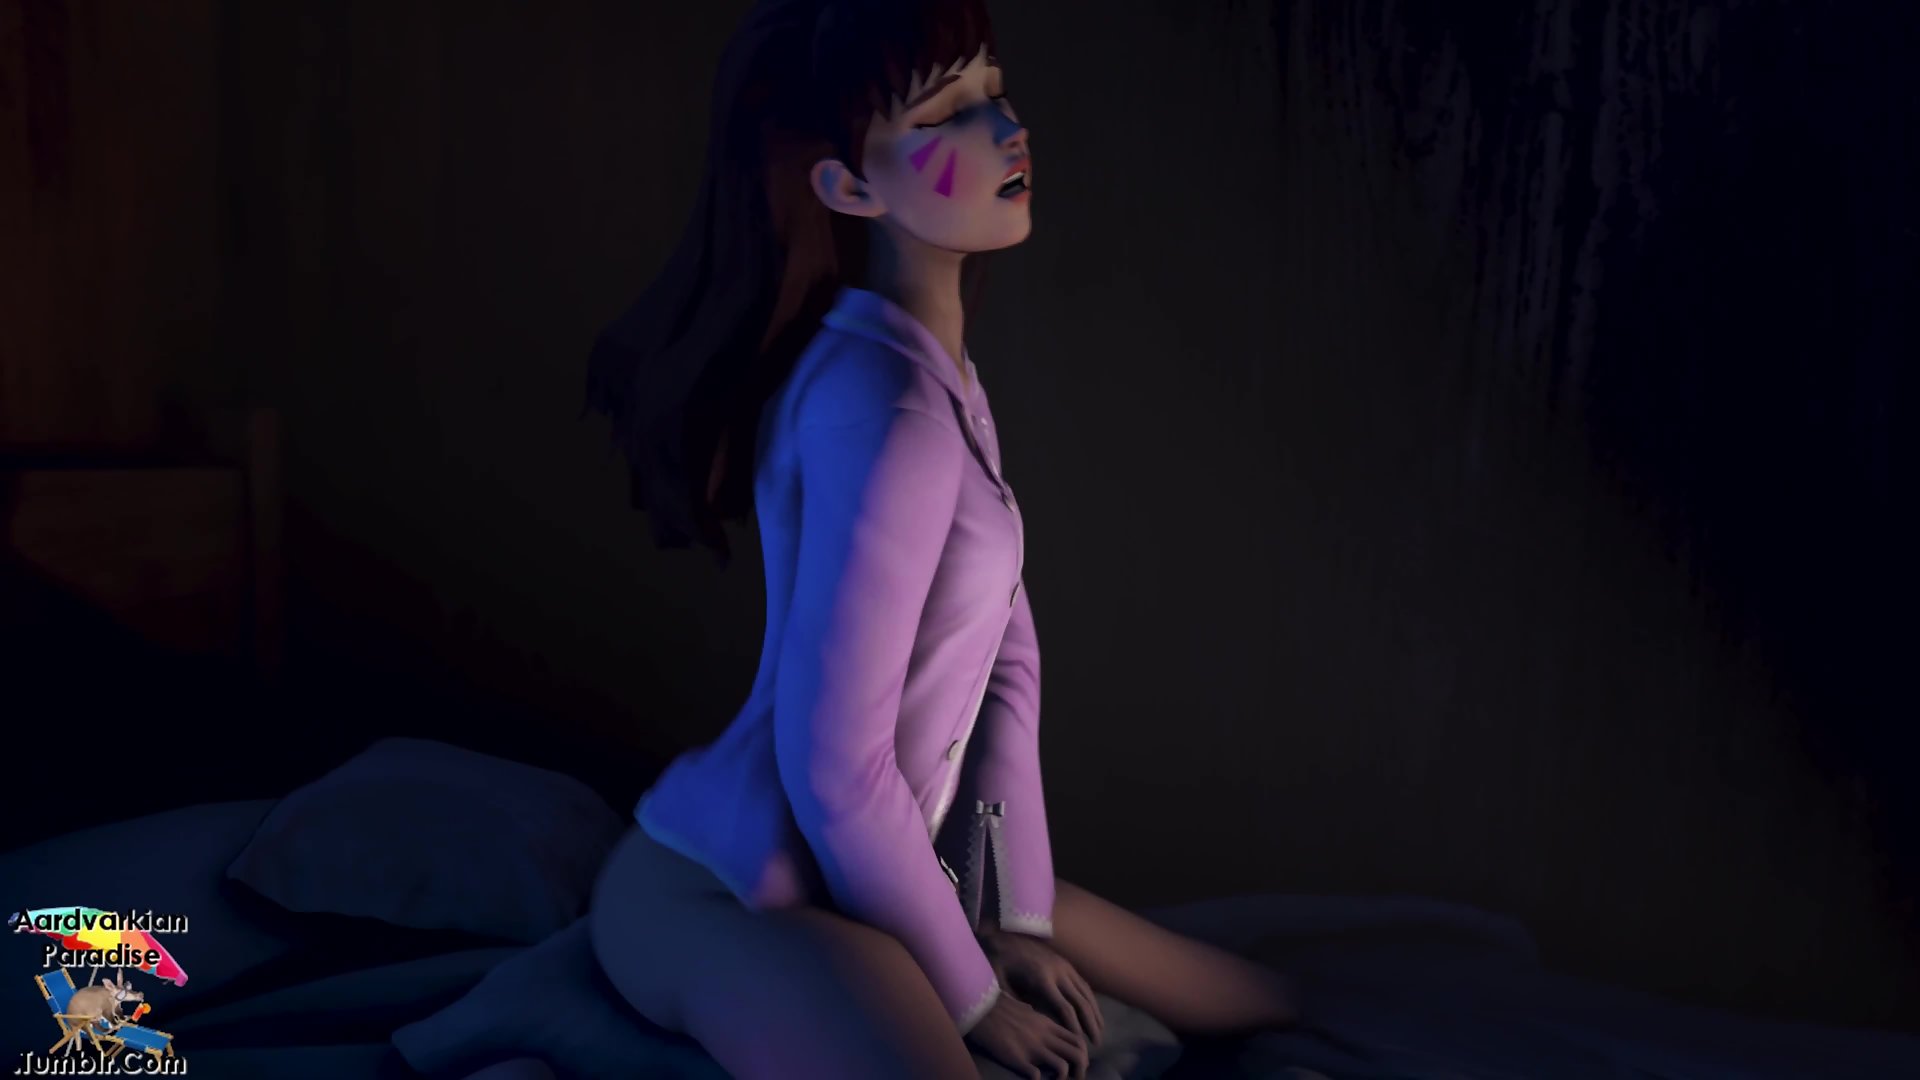 Rabbit Hole 1 D.Va watches porn while rubbing her pussy against a pillow